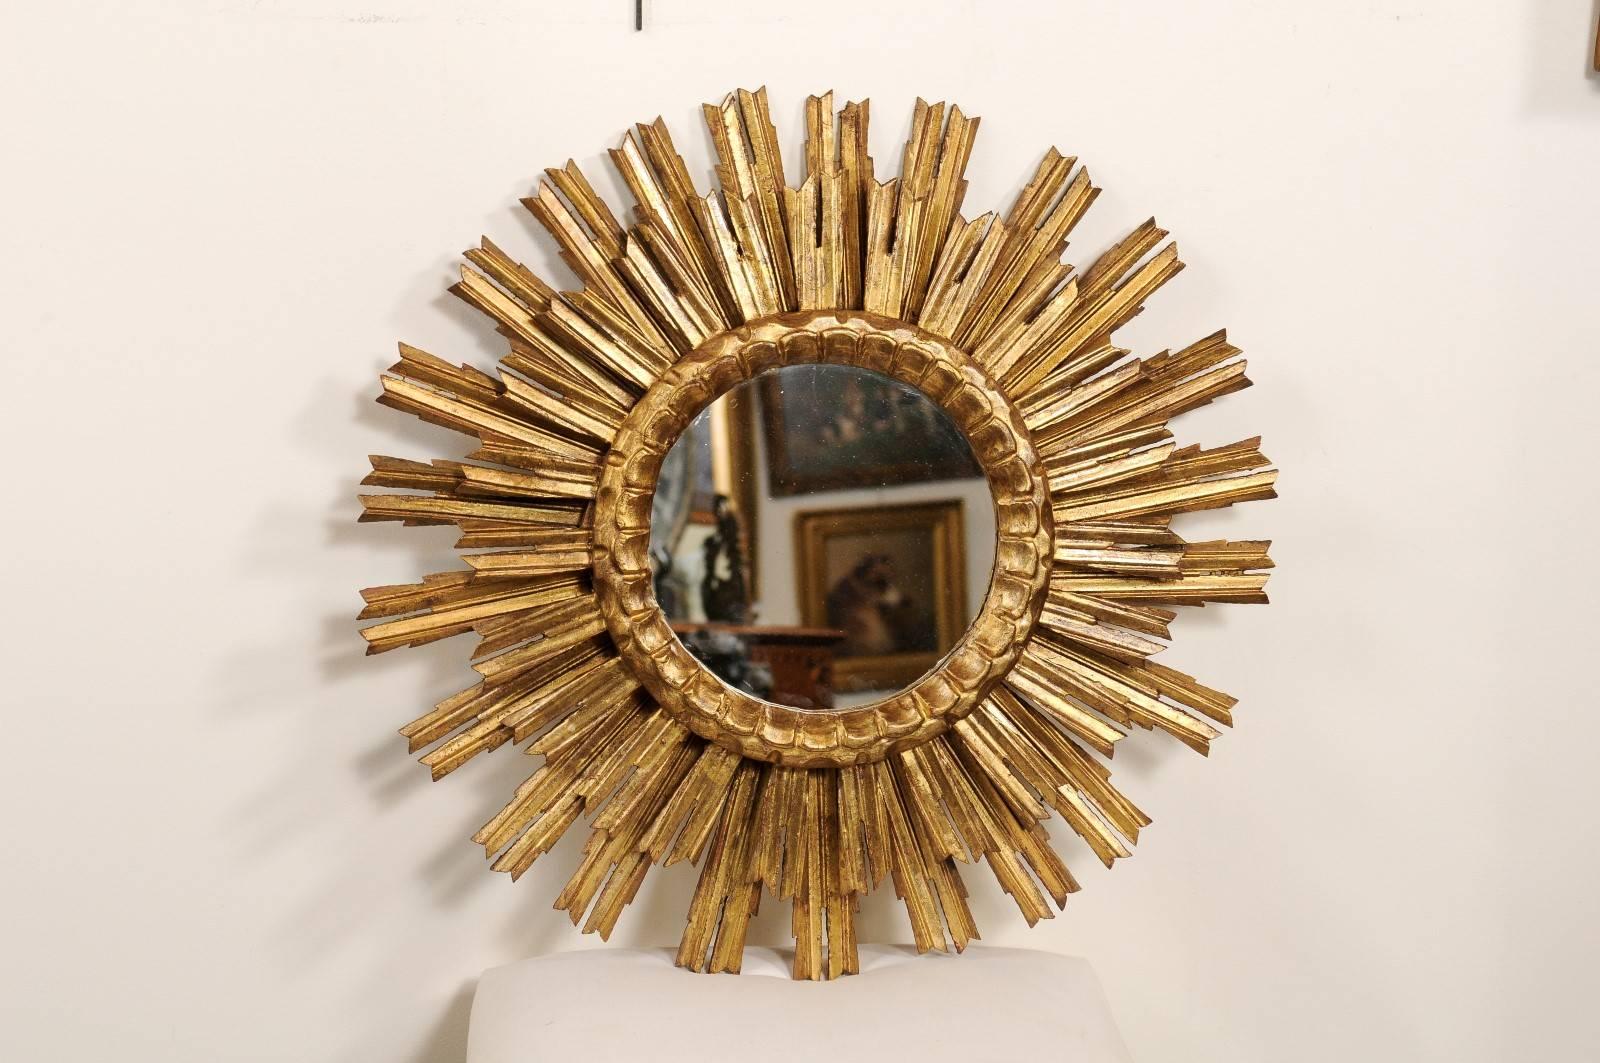 This French giltwood sunburst from the mid-20th century is made of a small central clear mirror, surrounded by a carved molding and double layered sunrays. While it can be difficult to find sunburst mirrors in good condition due to the fragility of